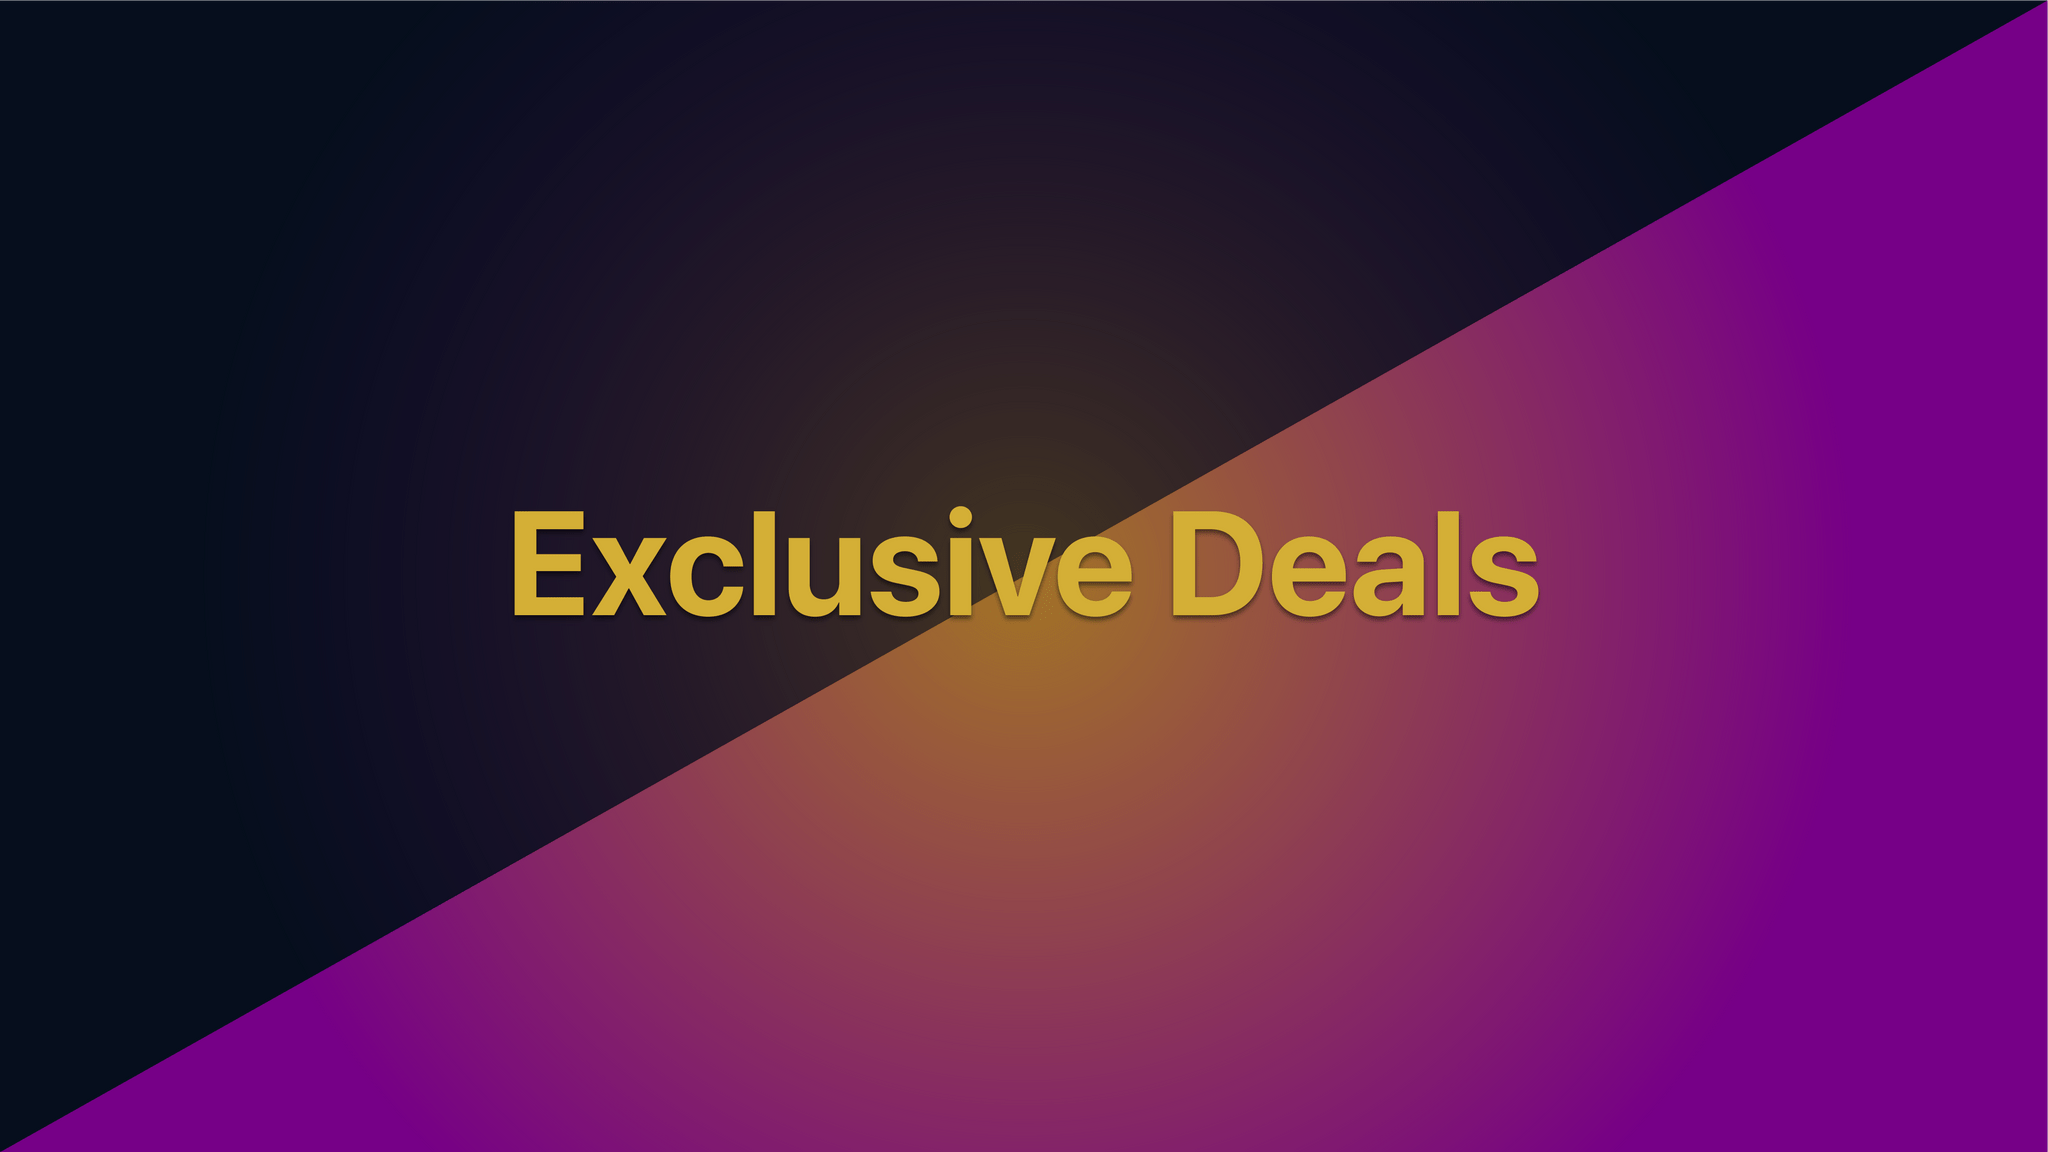 5. Exclusive XXVido Discounts and Coupons - wide 9